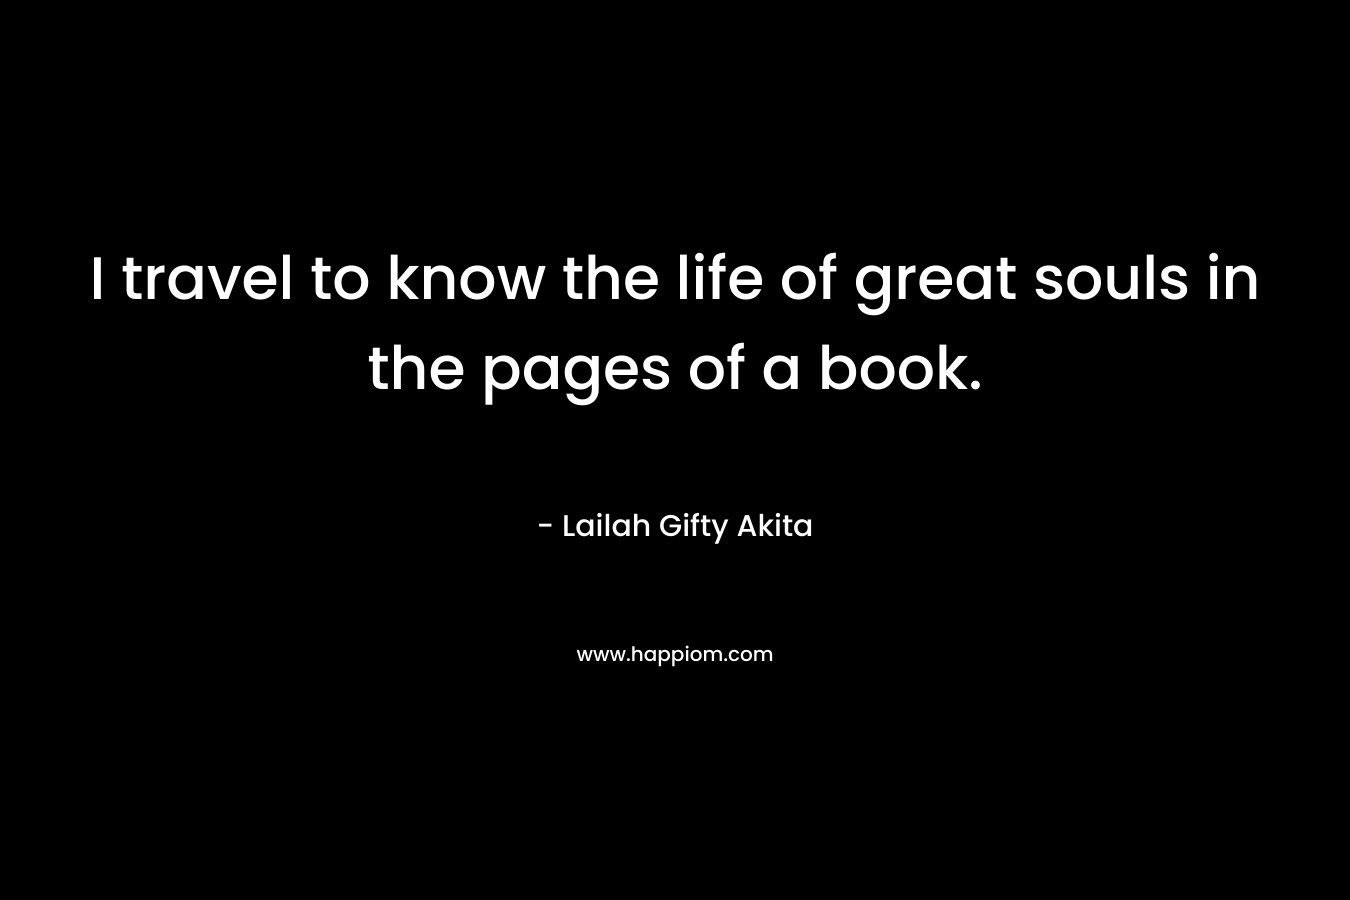 I travel to know the life of great souls in the pages of a book.